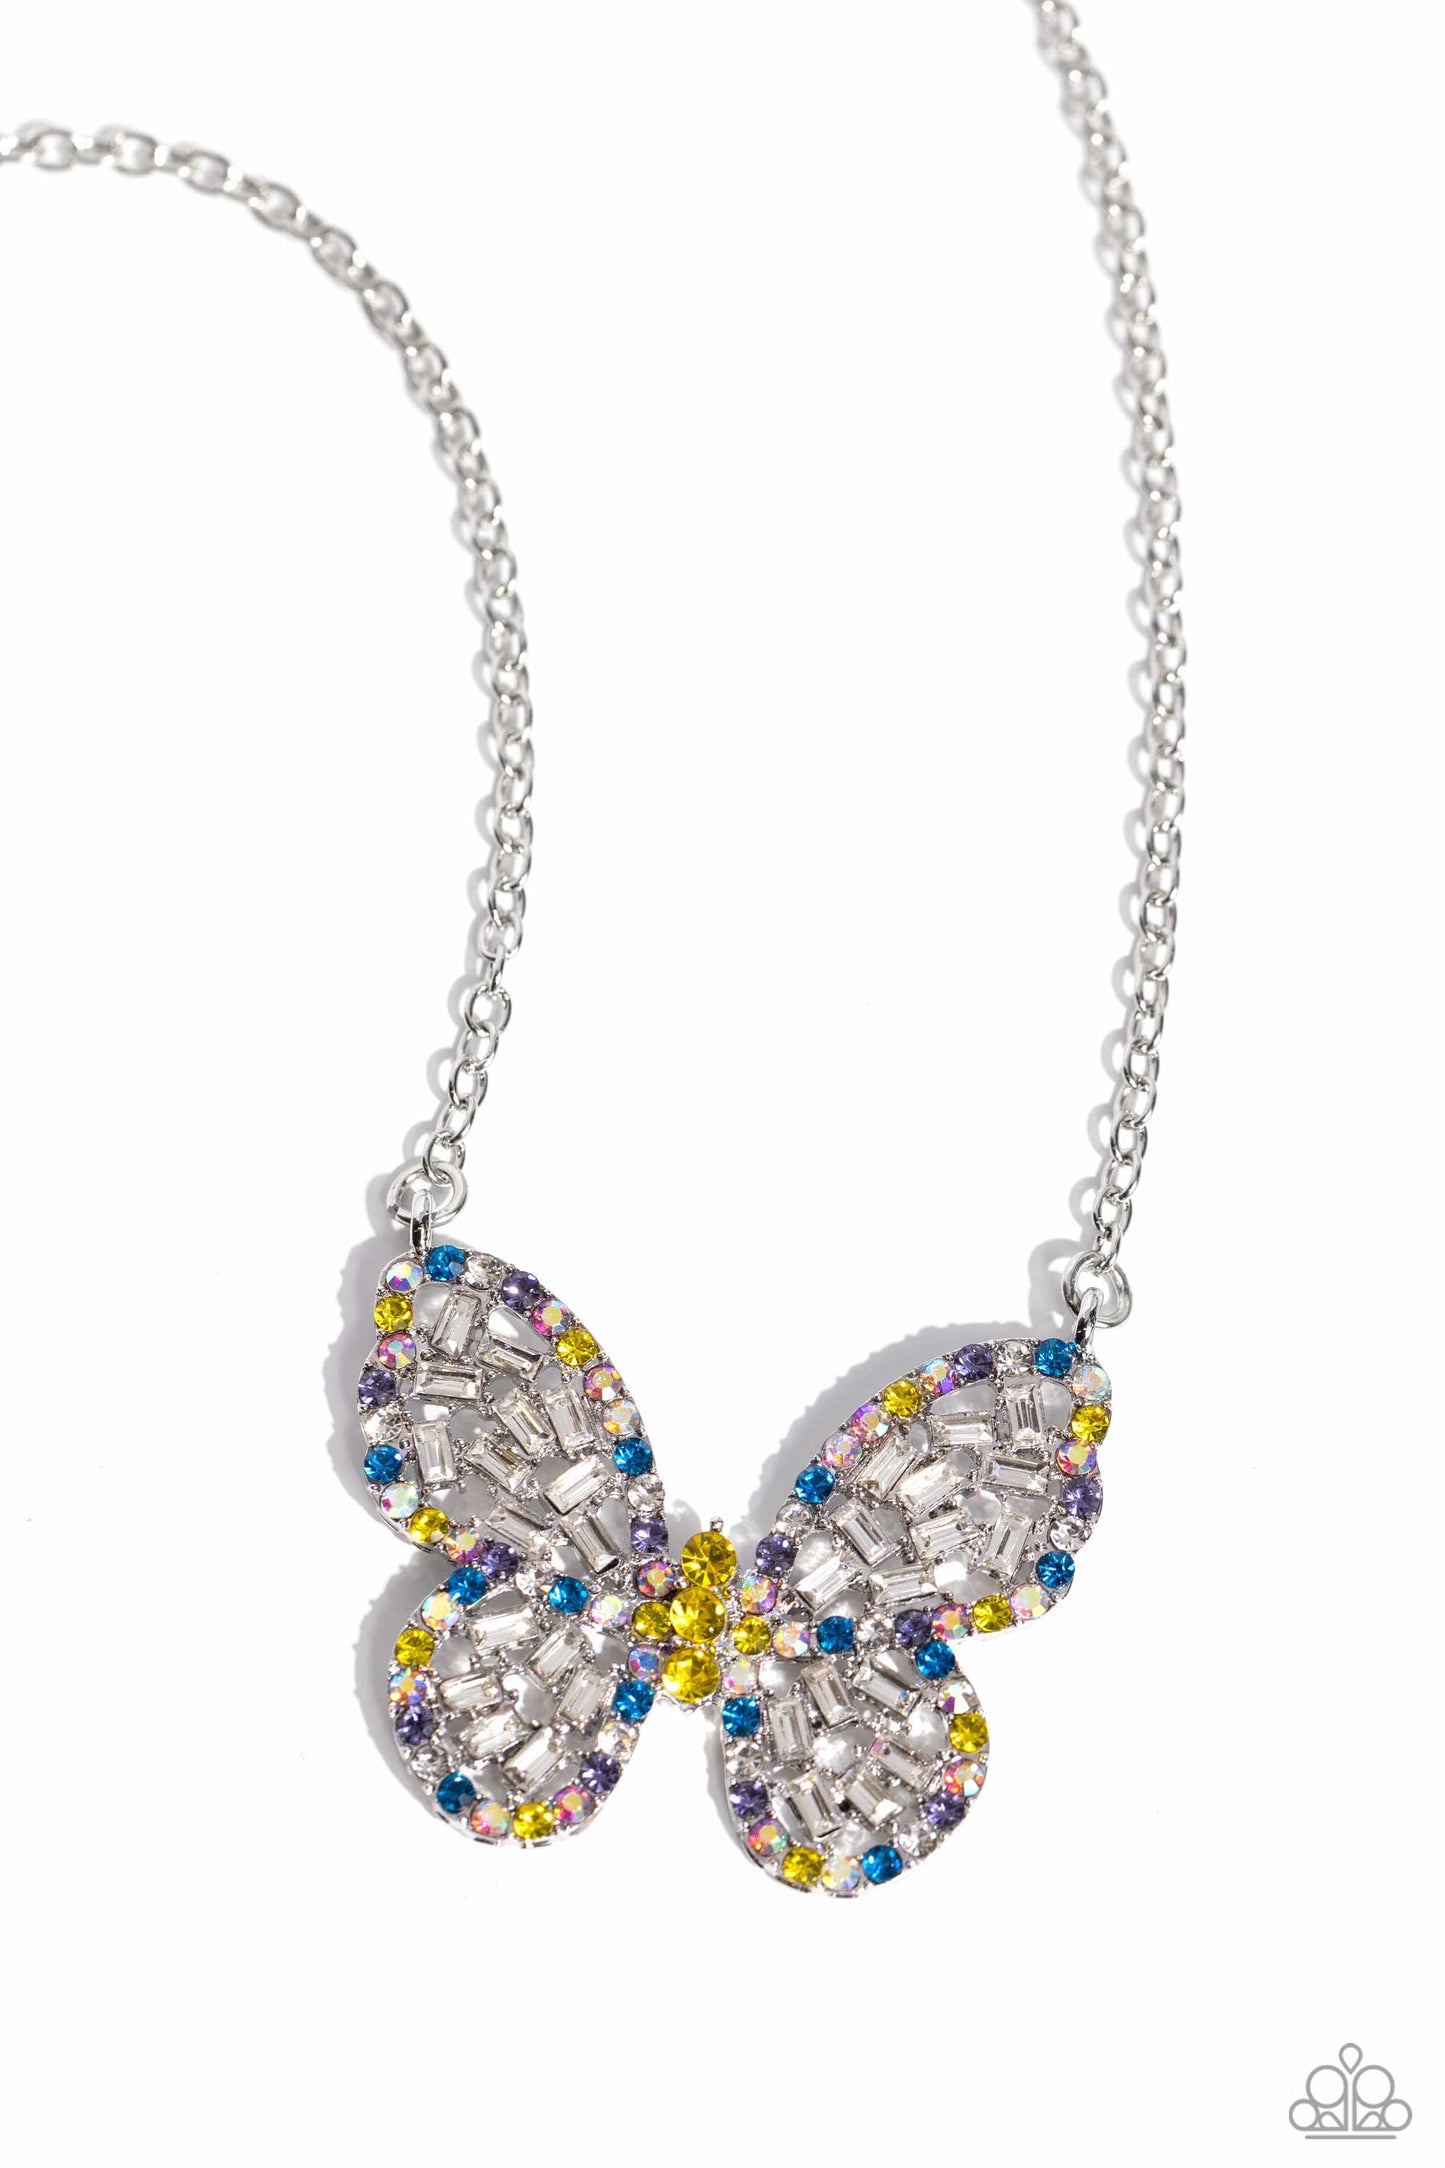 Aerial Academy - Yellow Iridescent Butterfly Necklace - Paparazzi Accessories - Bordered in multicolored and iridescent rhinestones, a collection of white emerald-cut dainty gems scatter across the interior of the airy silver butterfly. Additional dainty yellow rhinestones create the body of the butterfly for a further splash of color and whimsy.